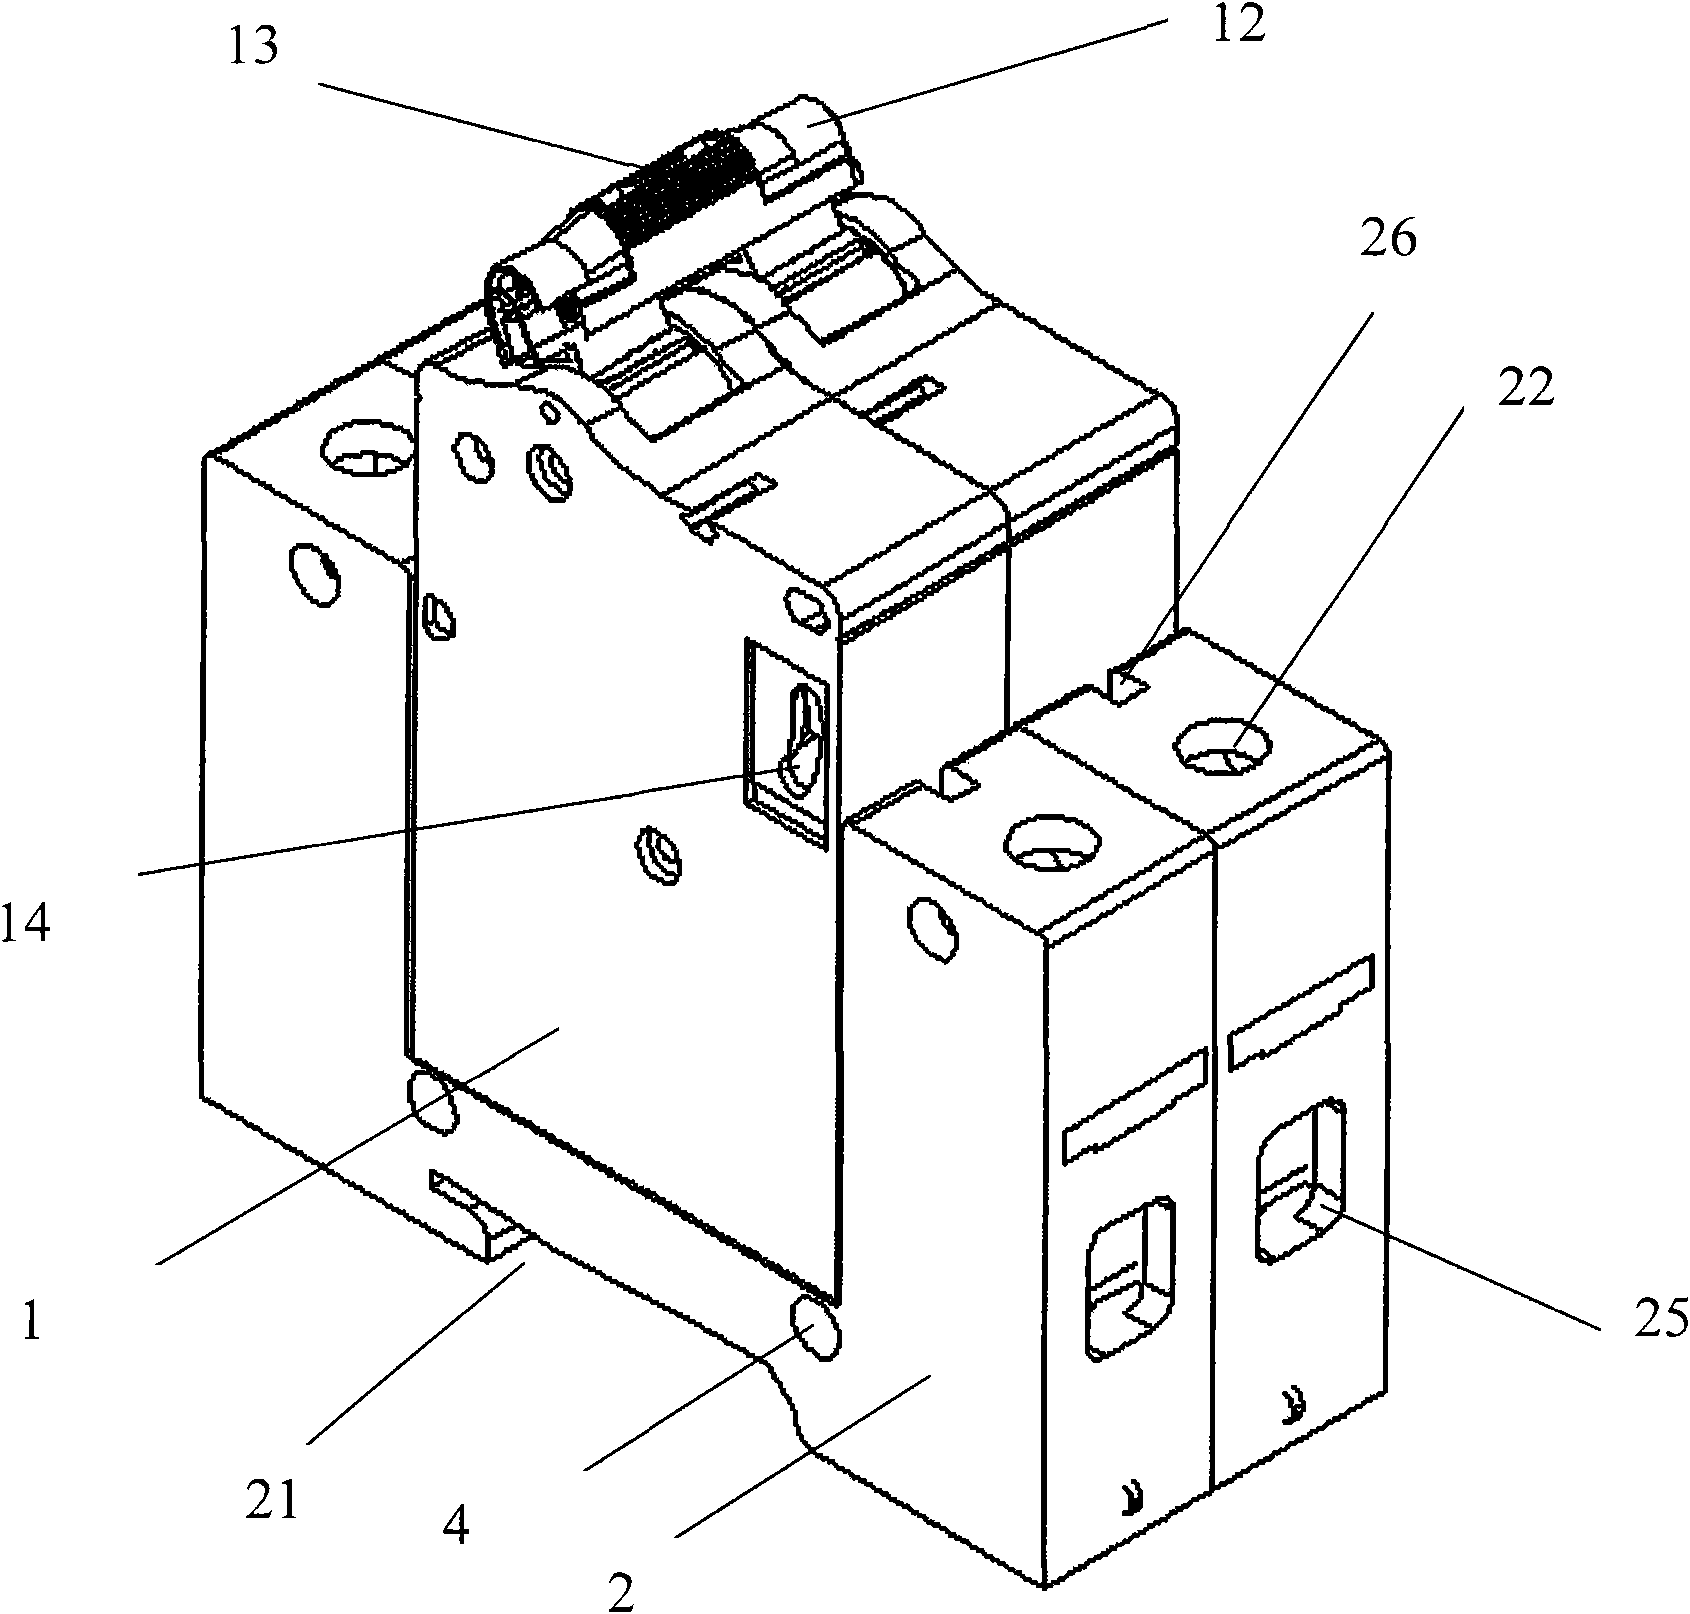 Miniature circuit breaker for side face plug-in installation